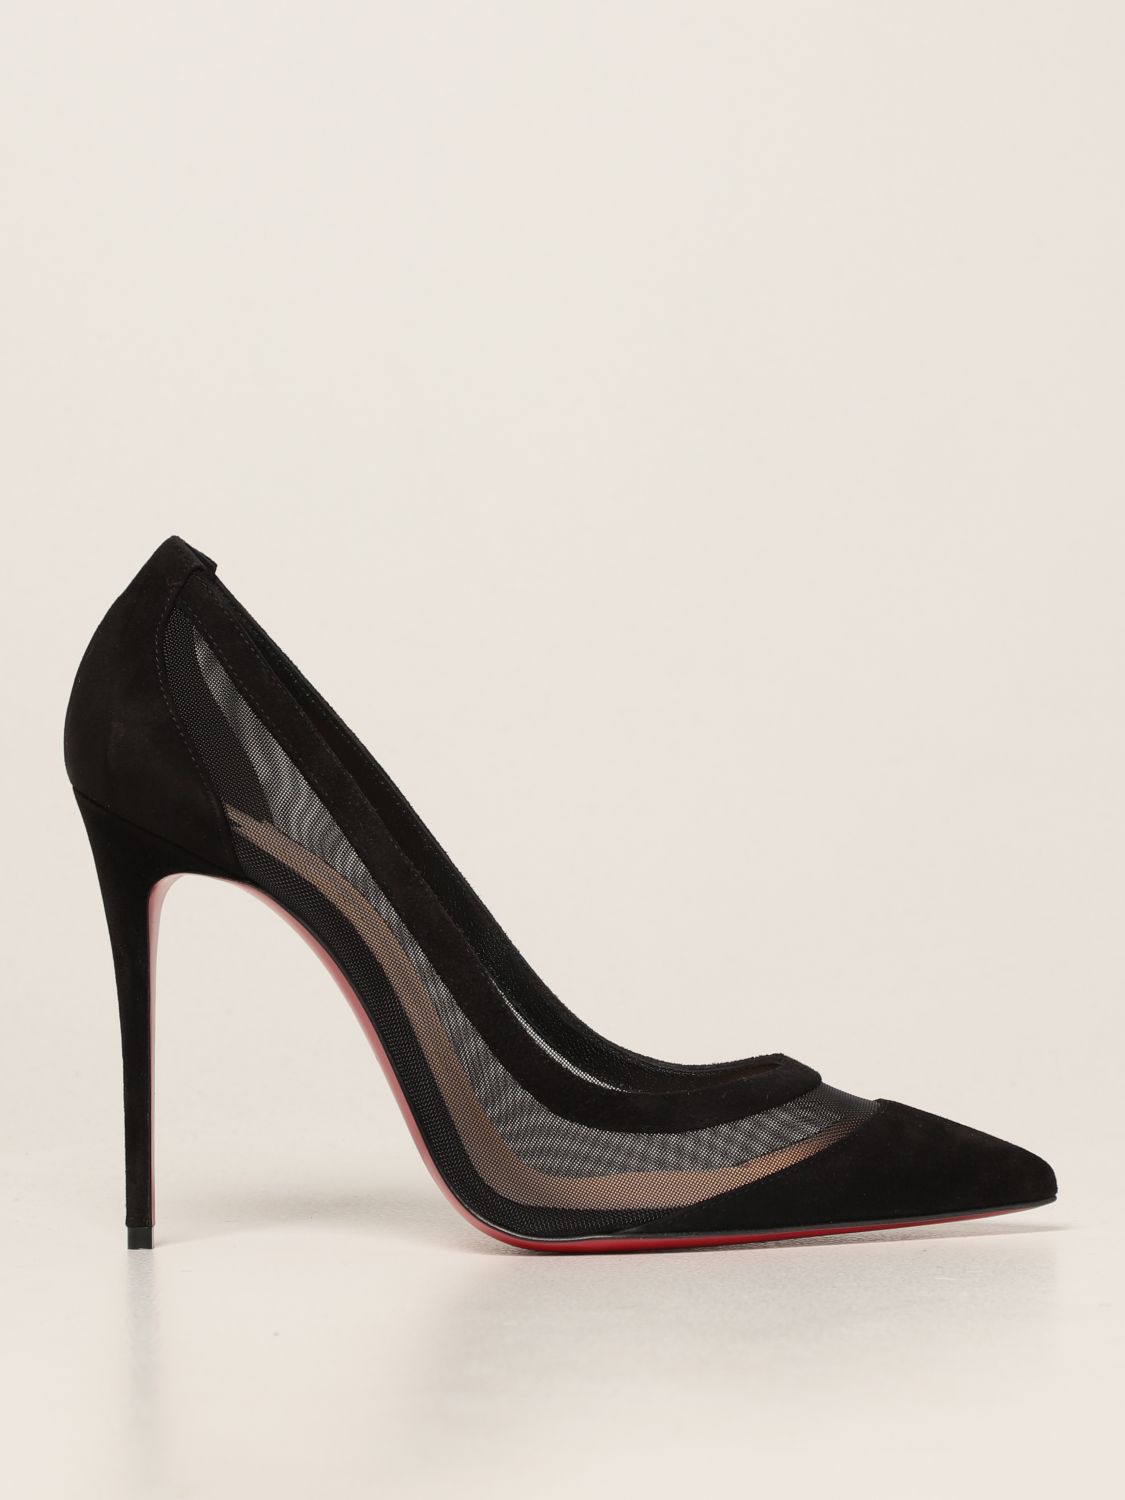 Galativi Christian Louboutin pumps in suede and mesh